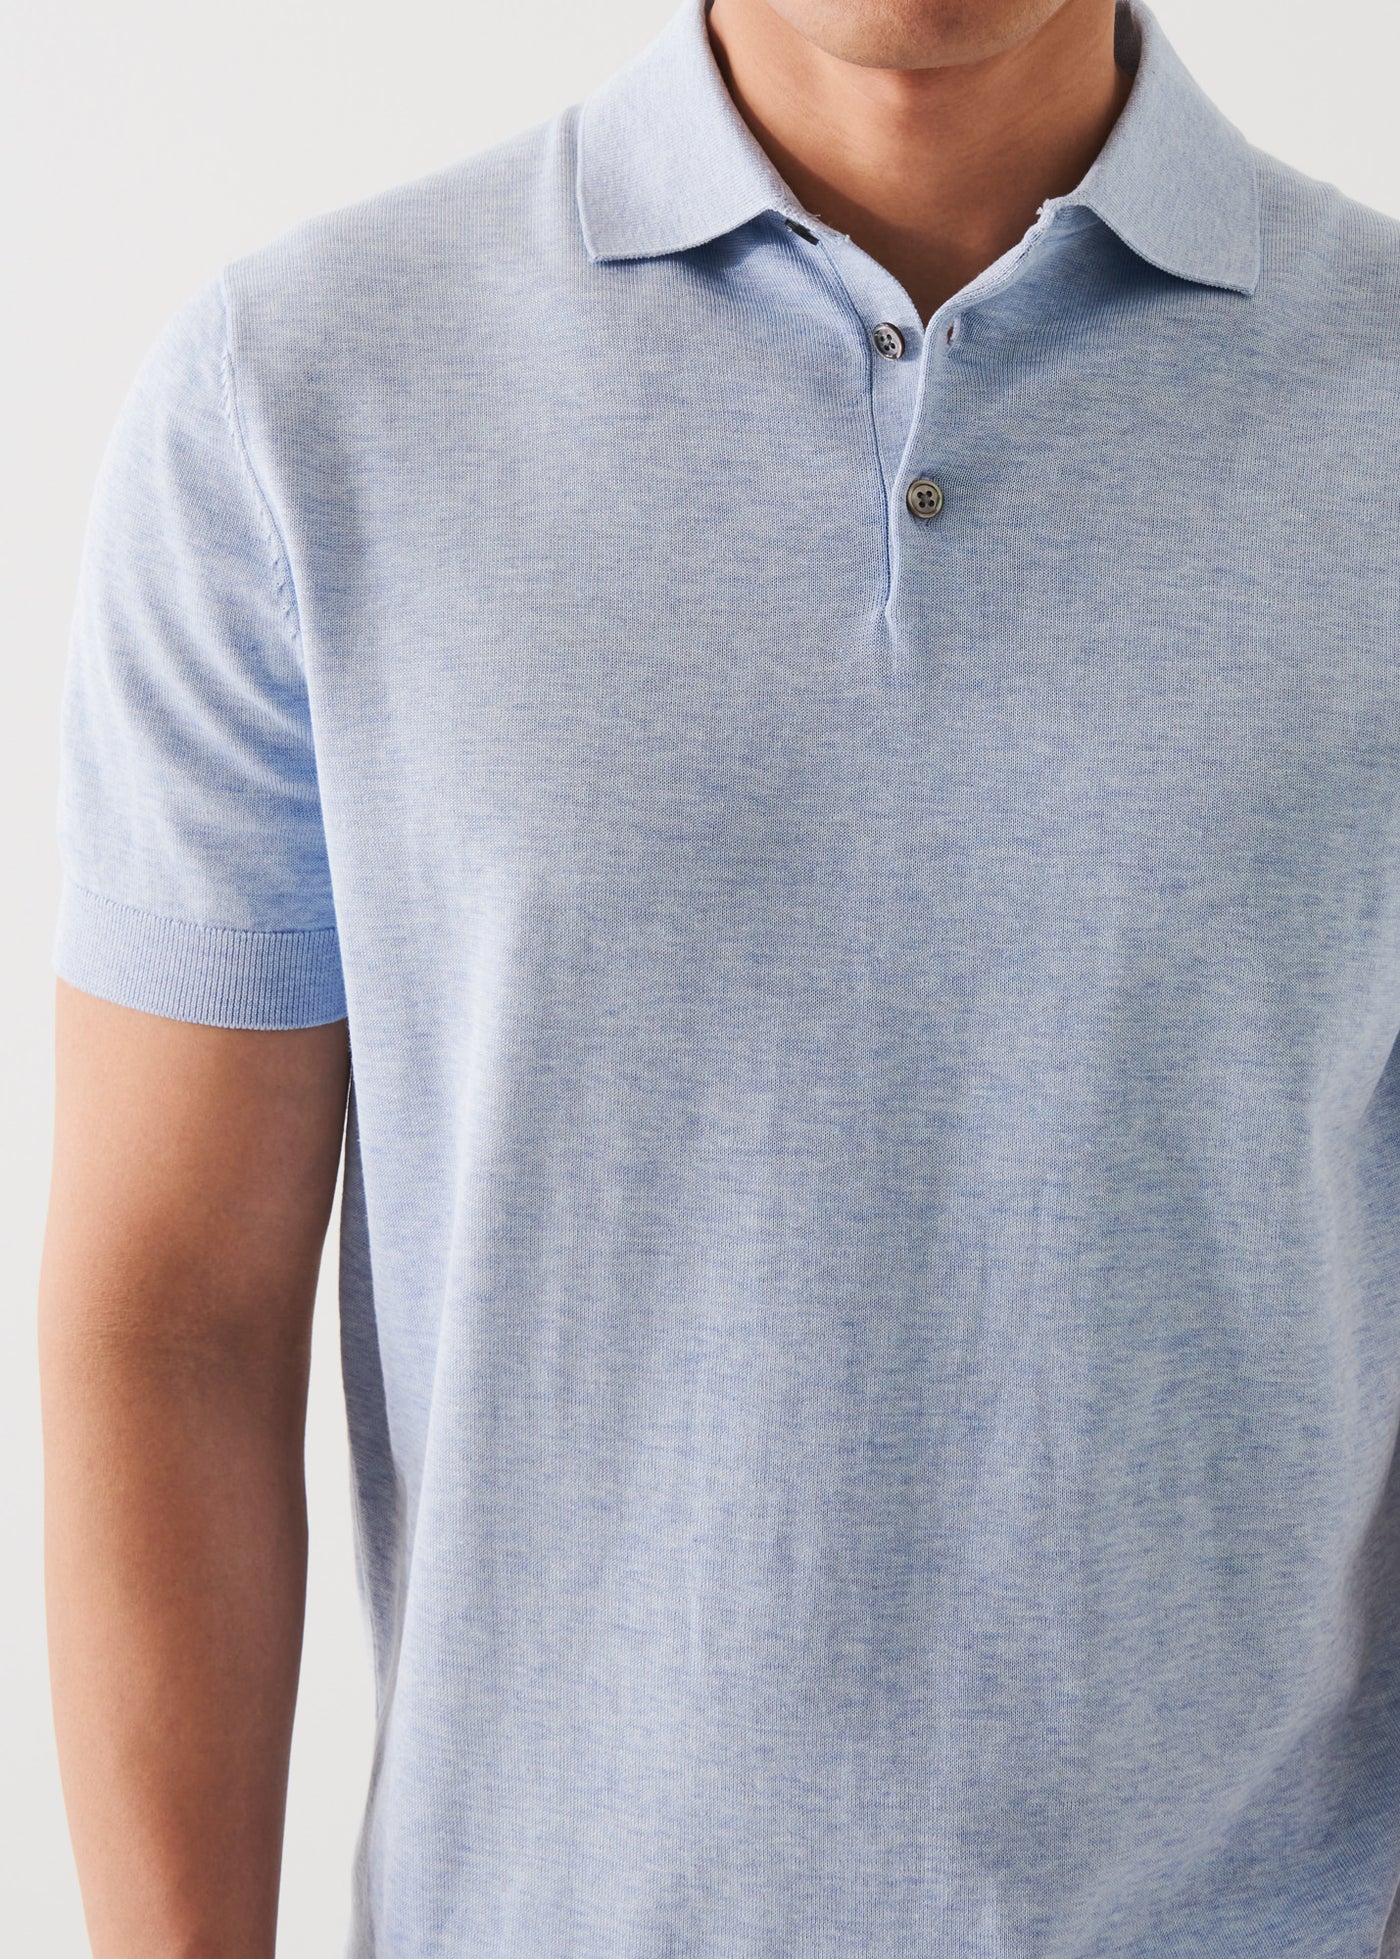 Patrick Assaraf Cotton Cupro Polo in Blue Bell